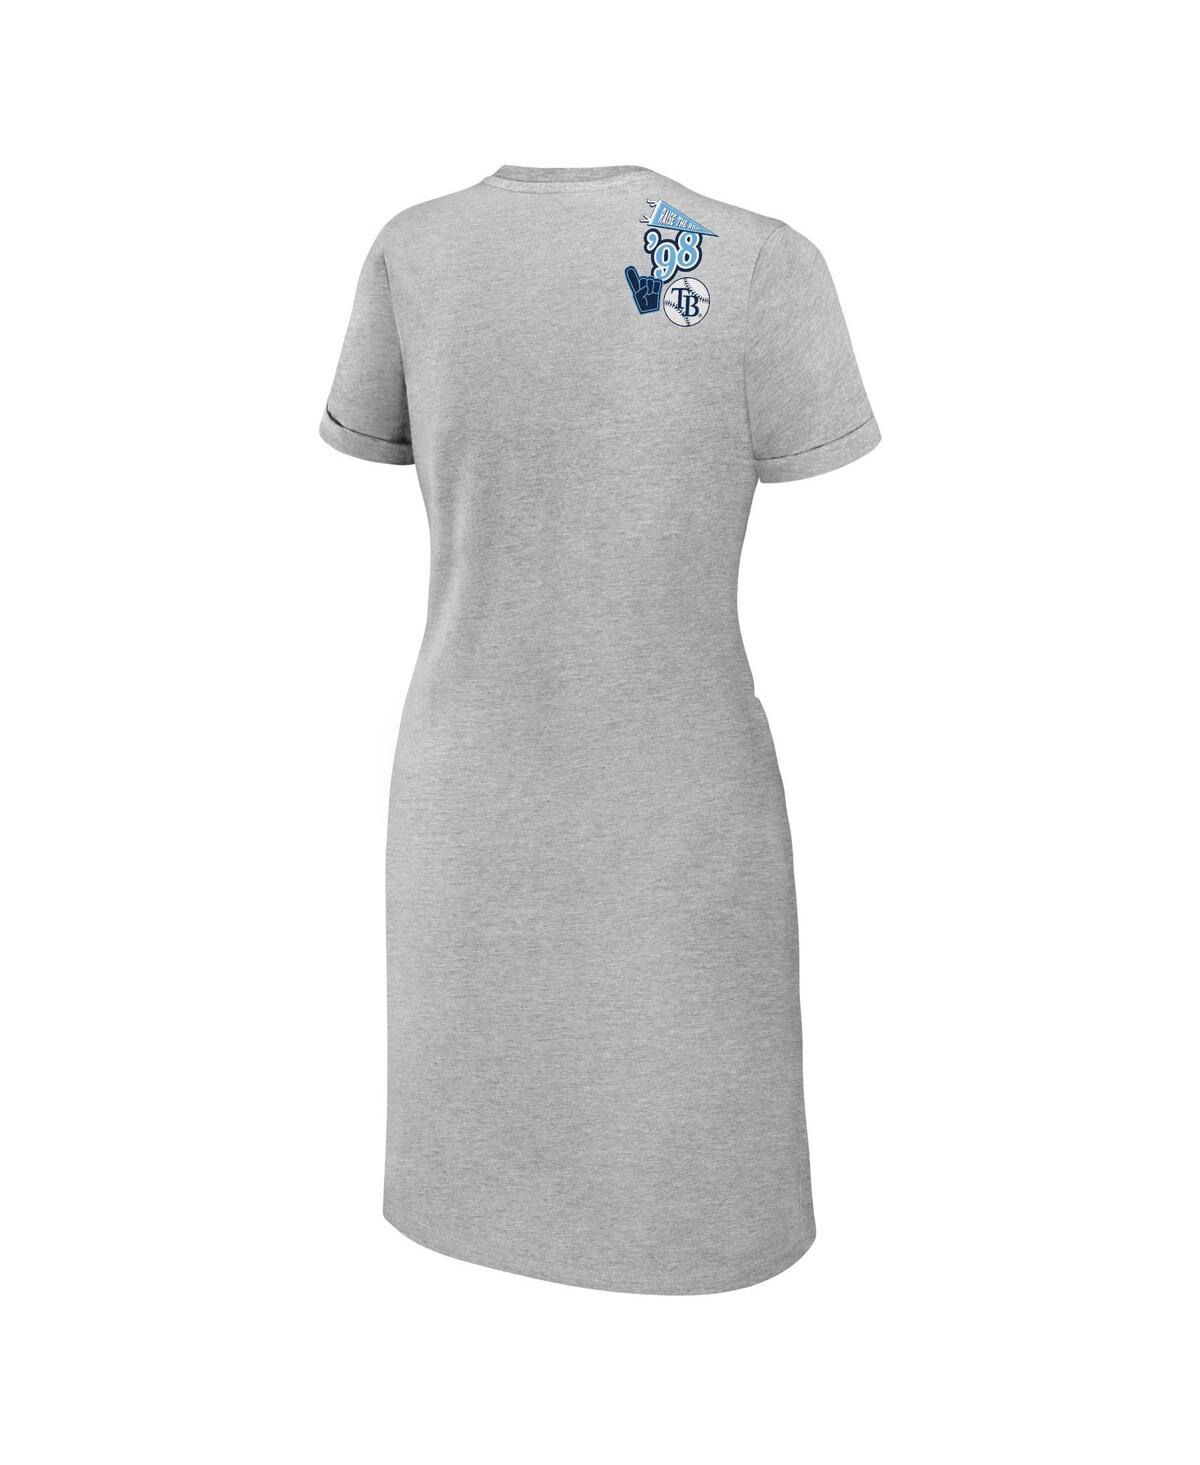 Shop Wear By Erin Andrews Women's  Heather Gray Tampa Bay Rays Knotted T-shirt Dress